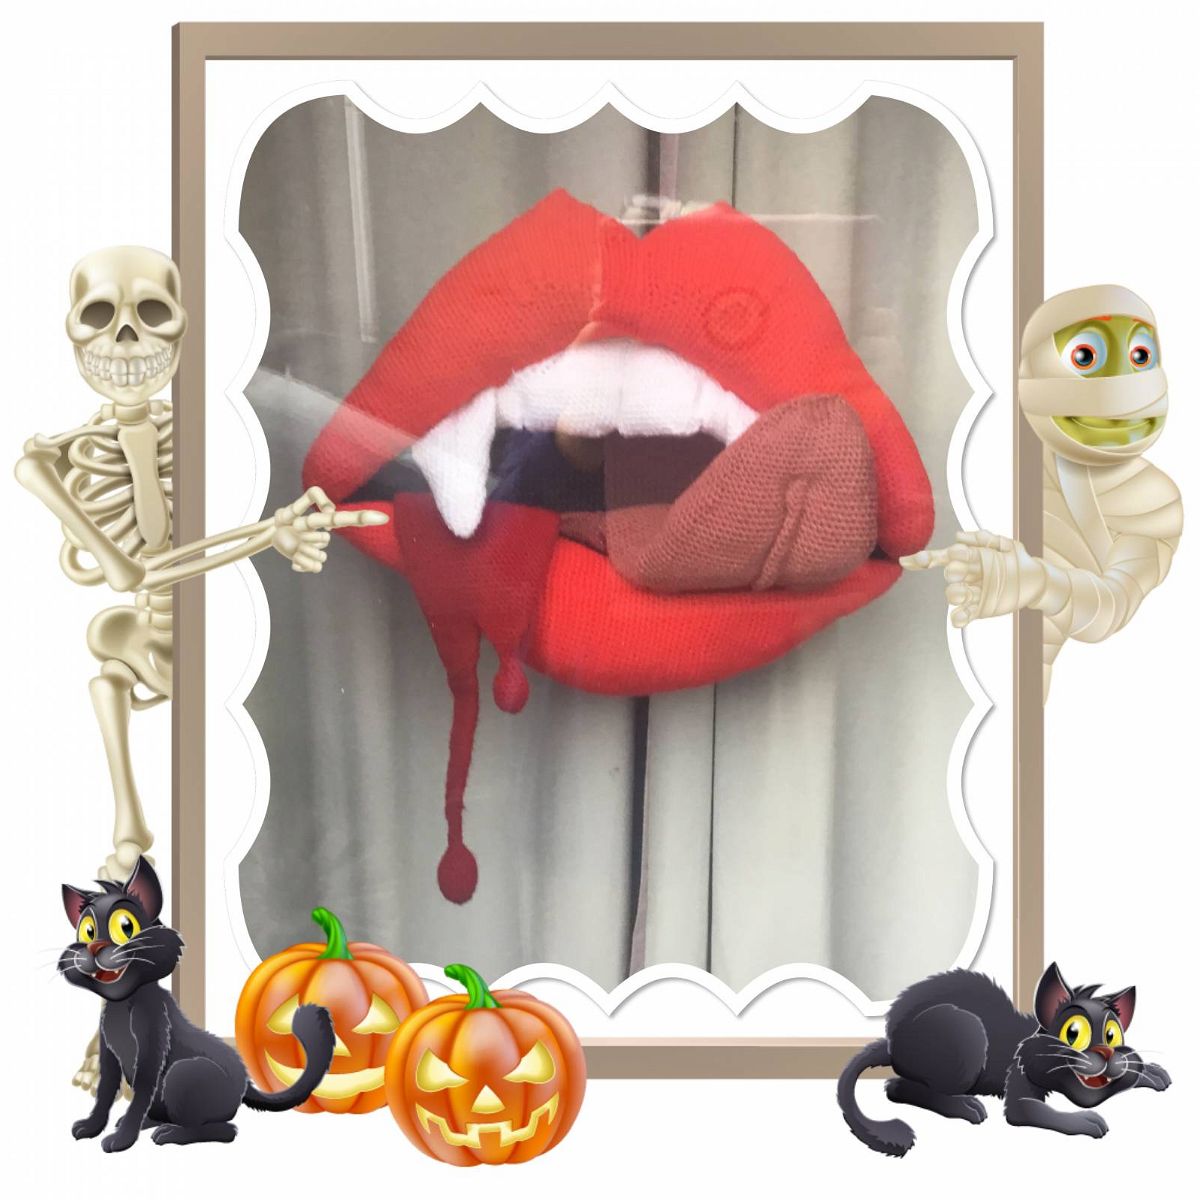 Amigurumi Vampire Lips Crochet Pattern Review by Sadie Laidlaw for Cottontail Whiskers